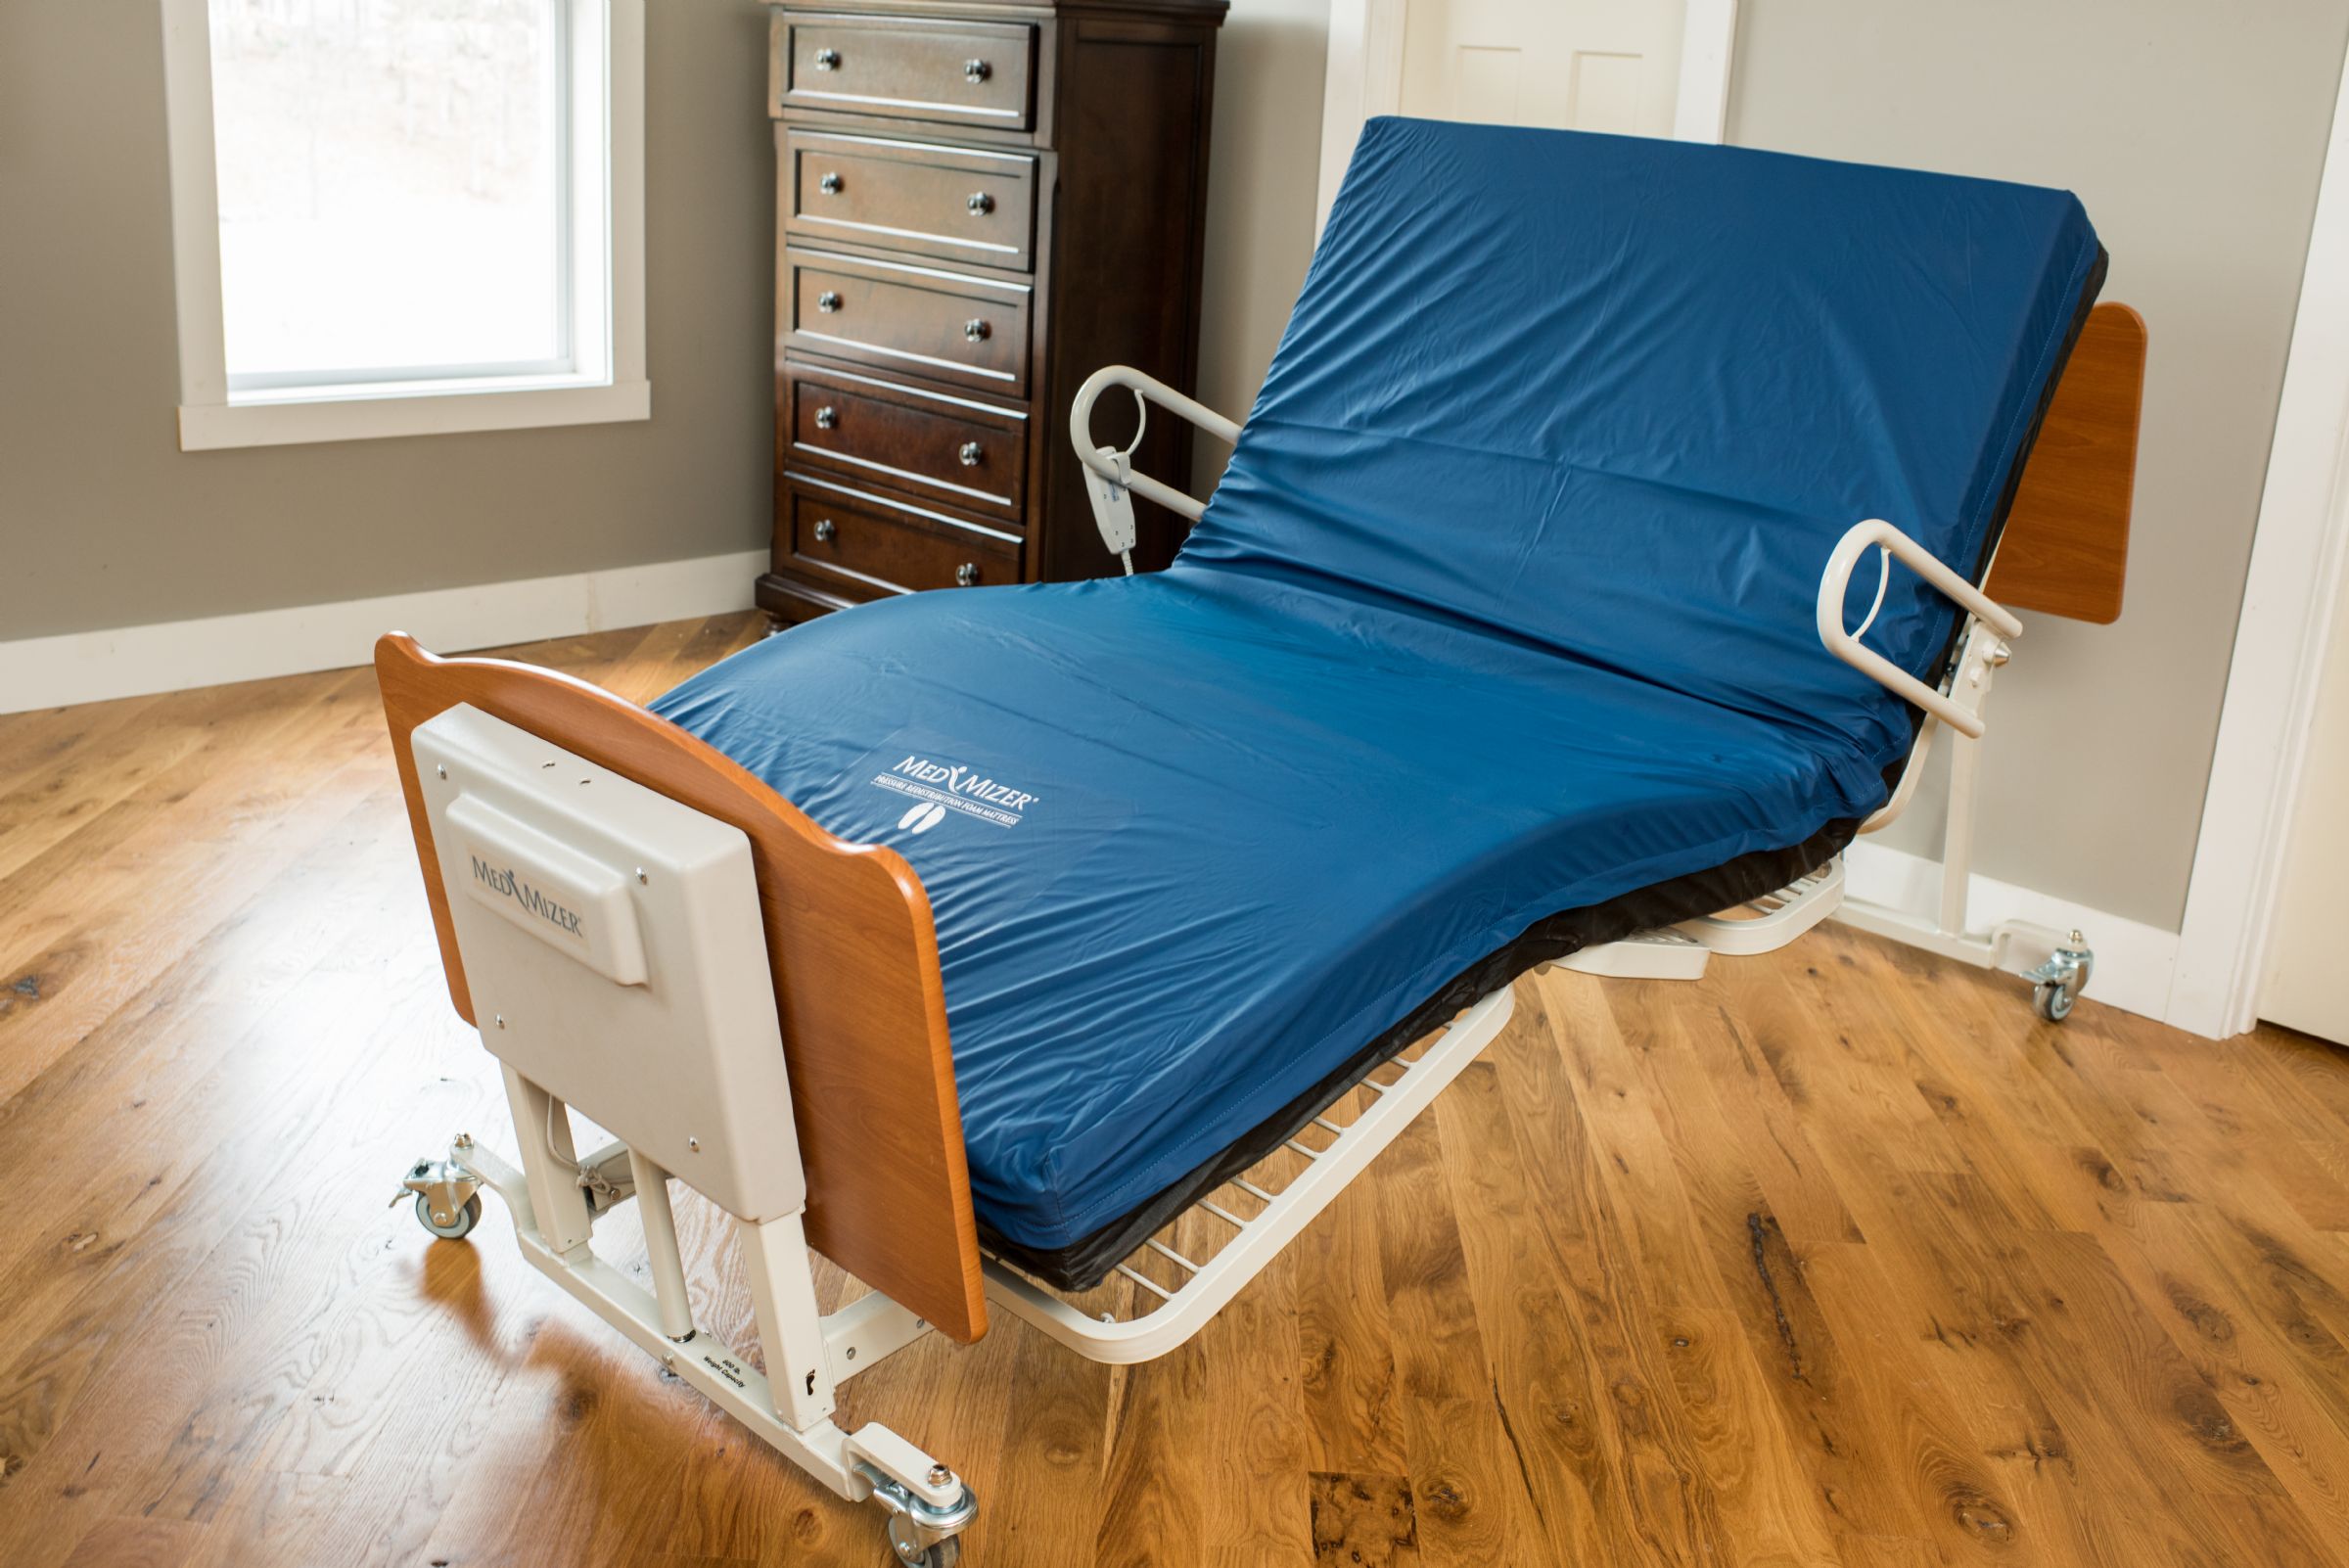 mattress for a hospital bed